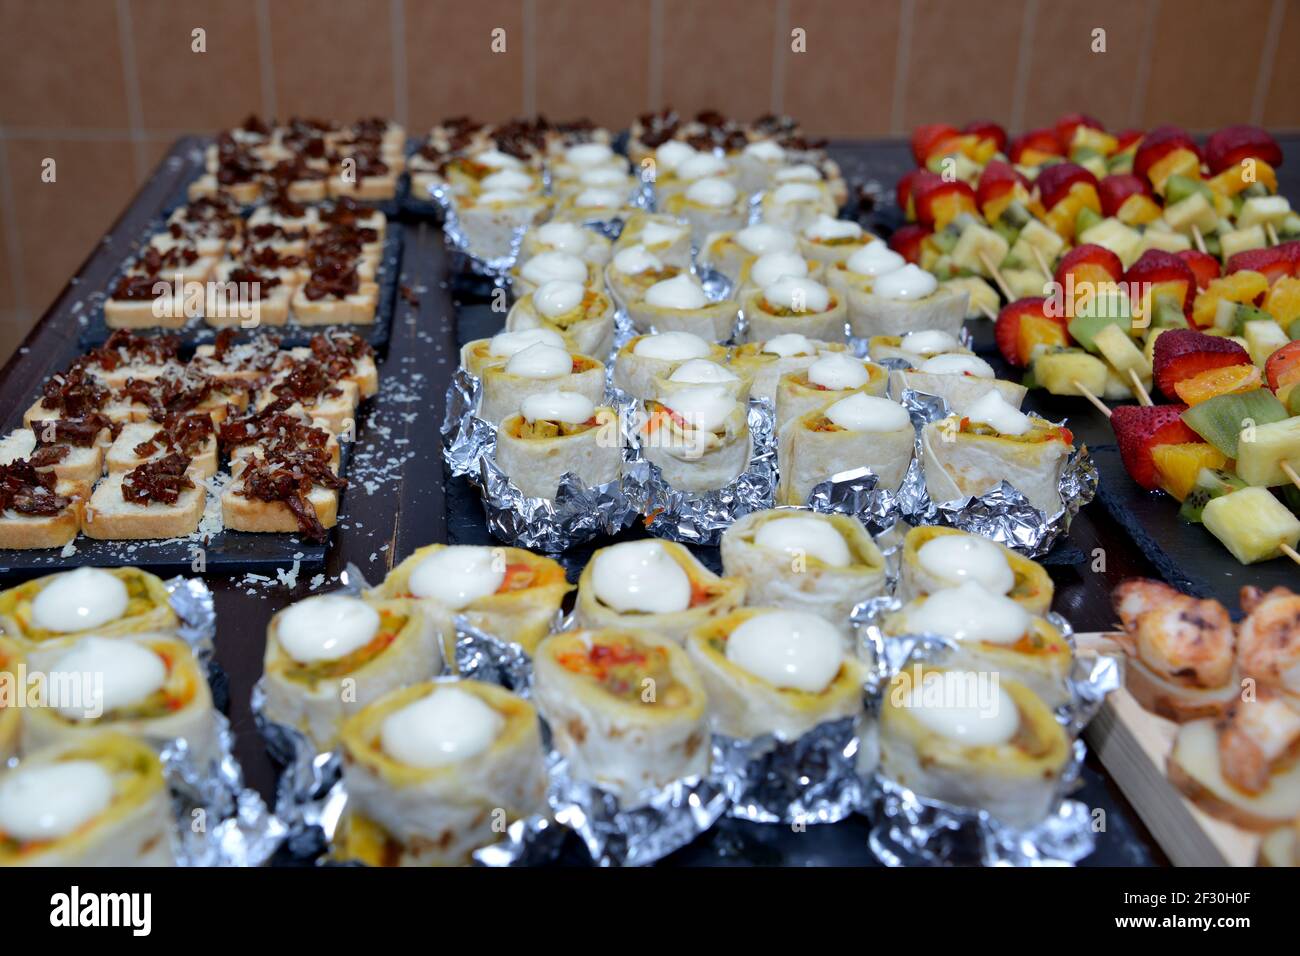 Salted buffet. Restaurant Food: The Food Sharing Culture Stock Photo